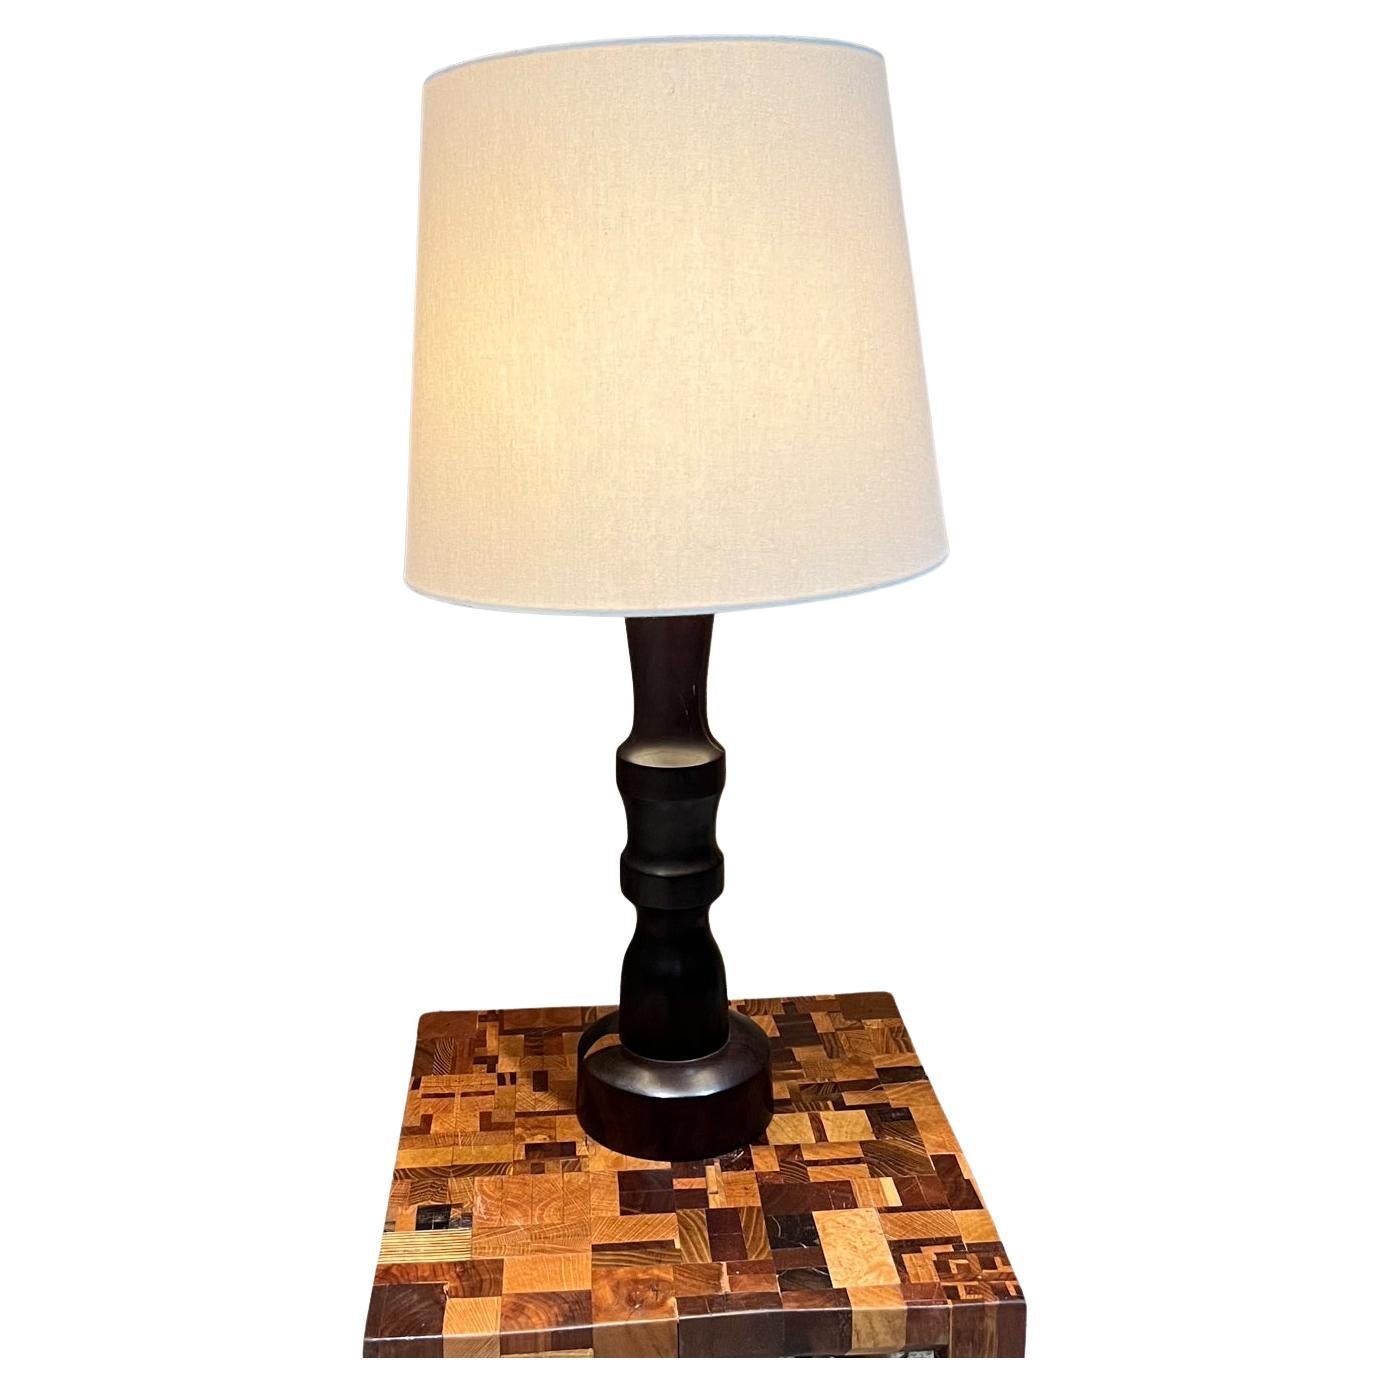 1950s Sculptural Spindle Table Lamp in Mexican Palo Fierro Desert Ironwood For Sale